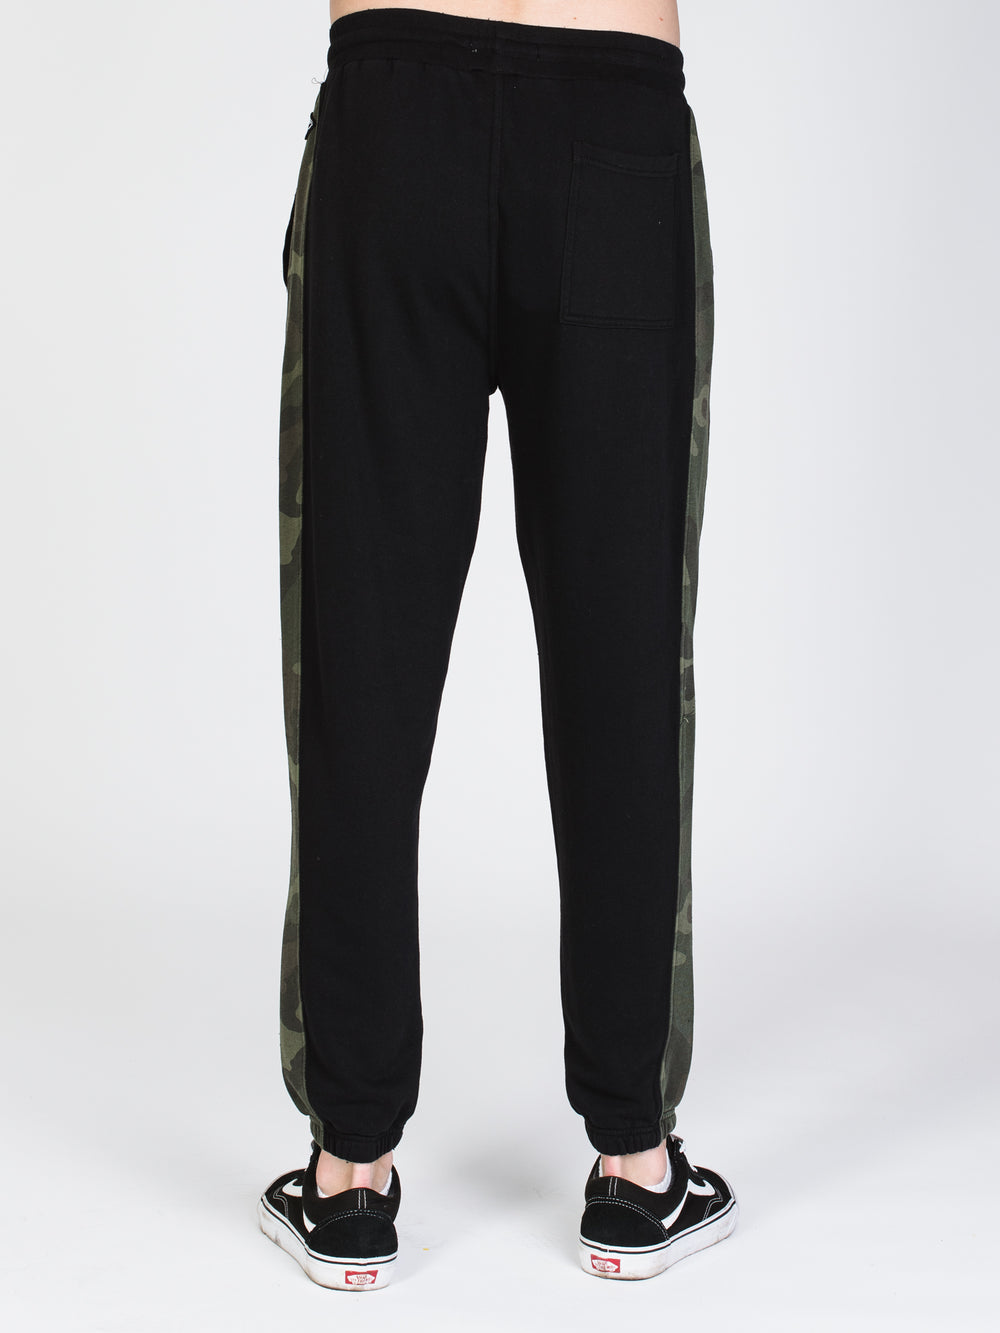 MENS WAVE WASHED PANT - BLACK/CAMO - CLEARANCE